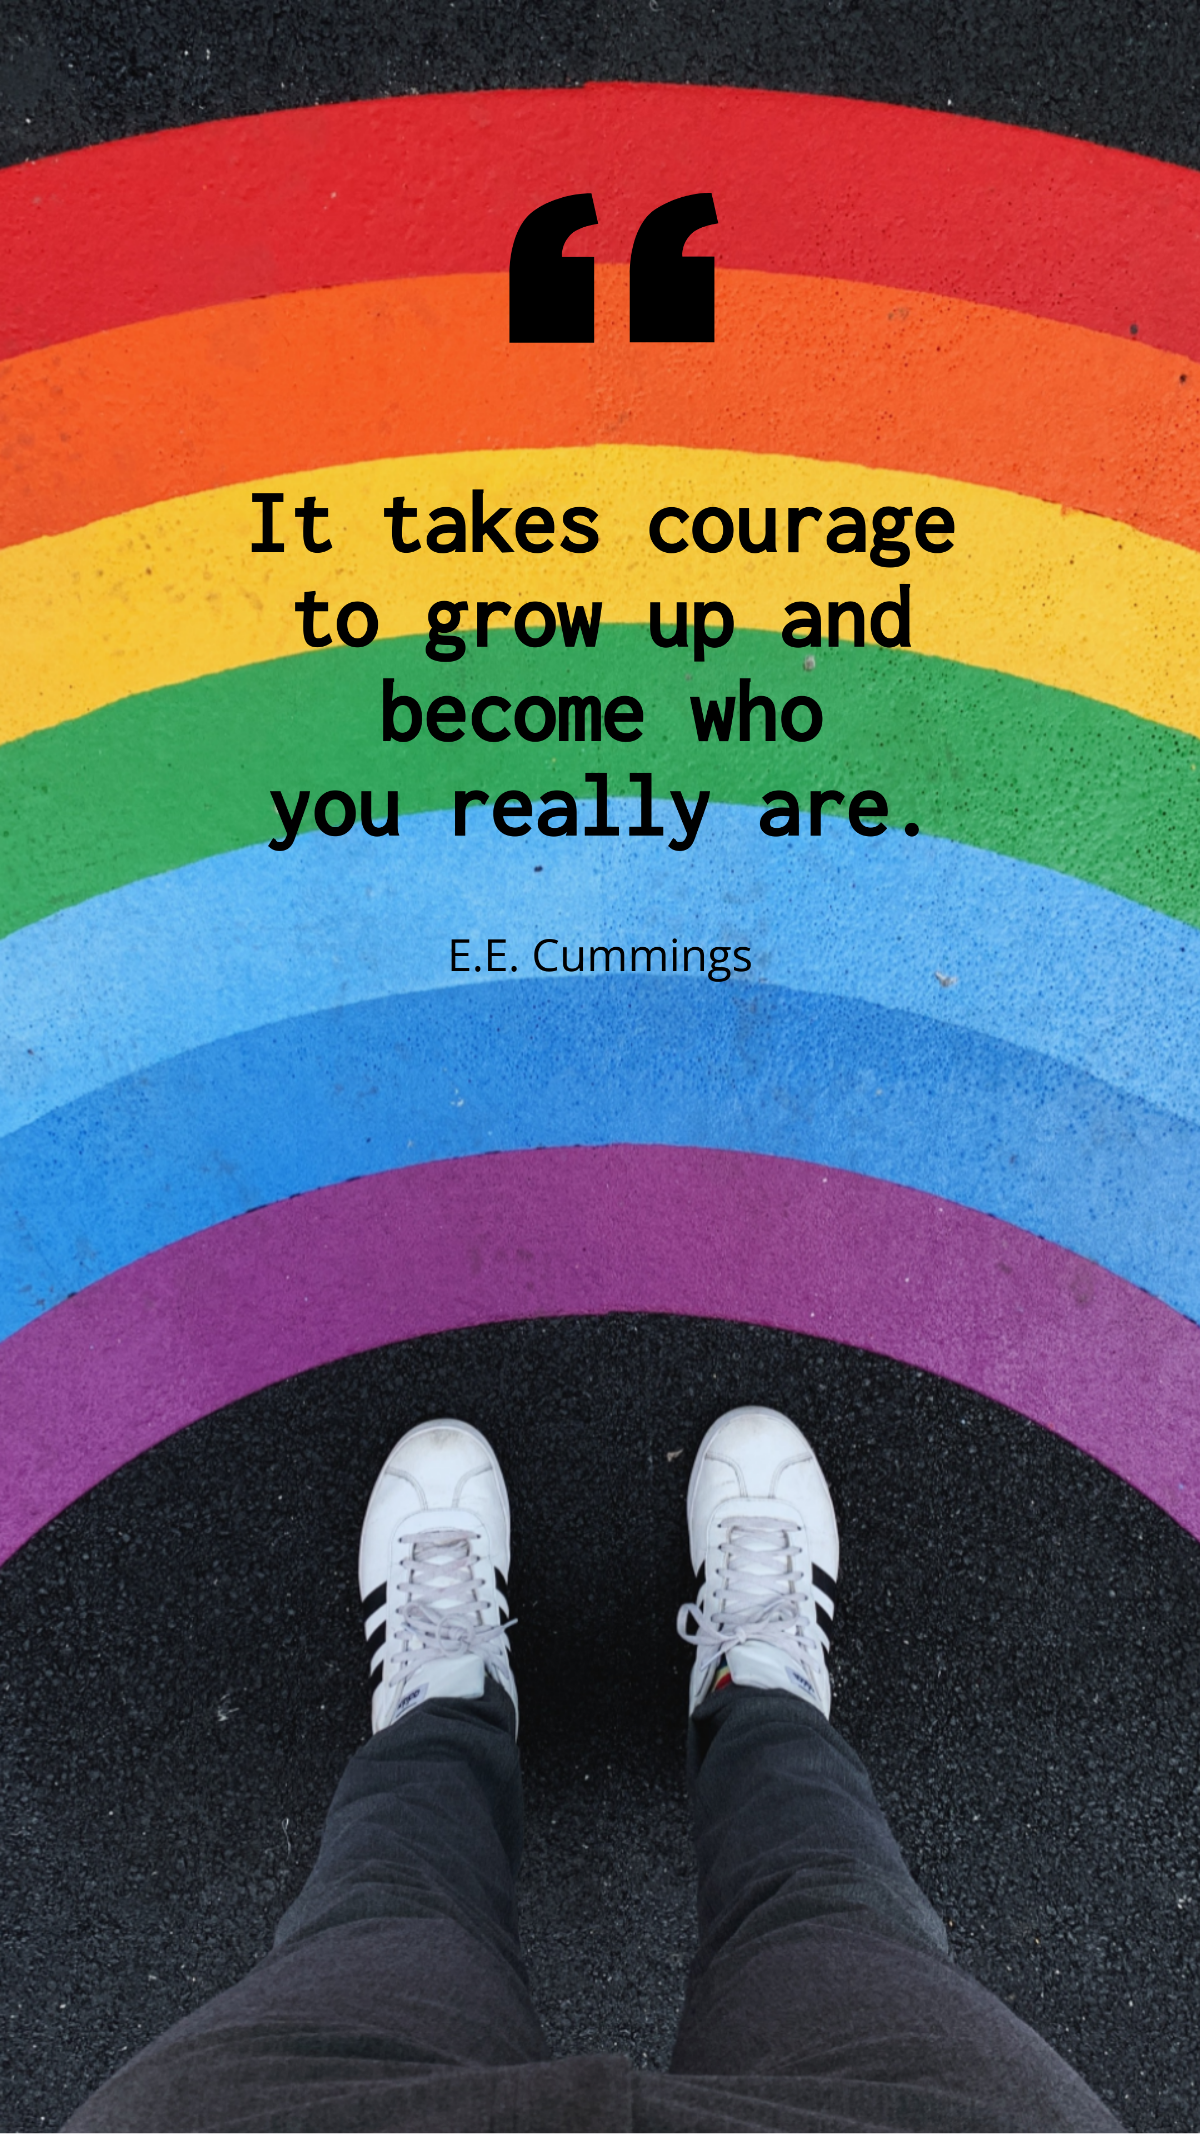 E.E. Cummings - It takes courage to grow up and become who you really are. Template